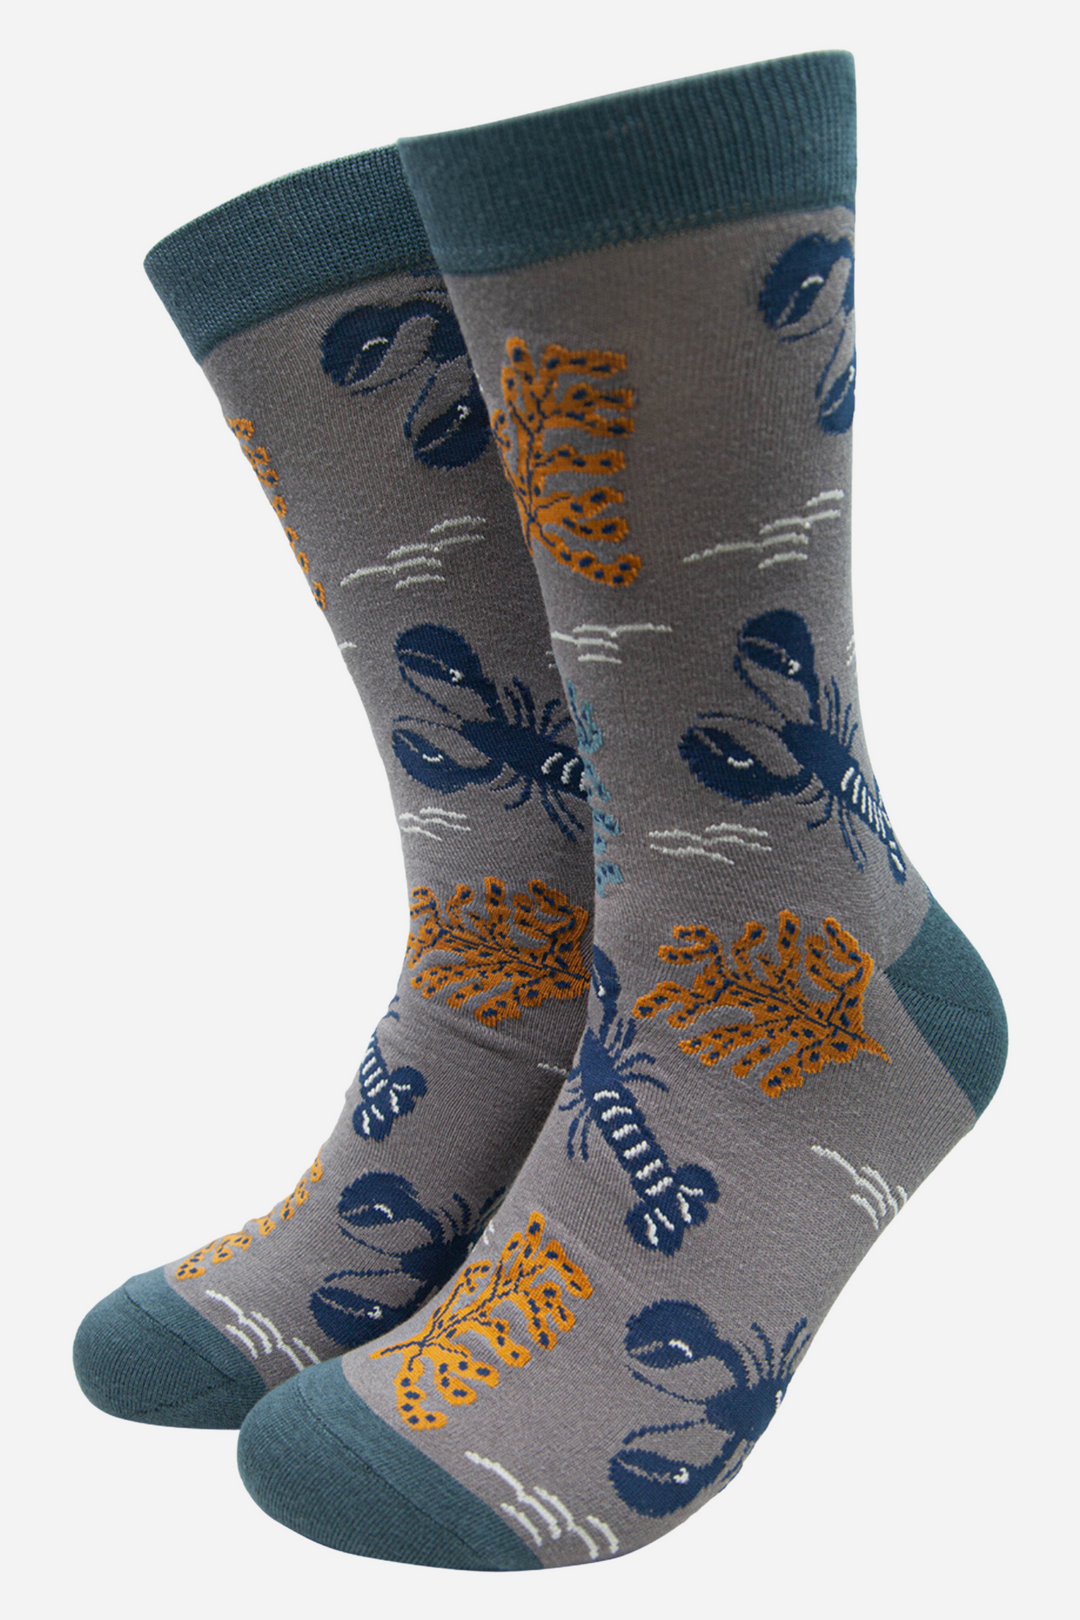 grey and blue bamboo socks with an all over pattern of red lobsters and coral plant life